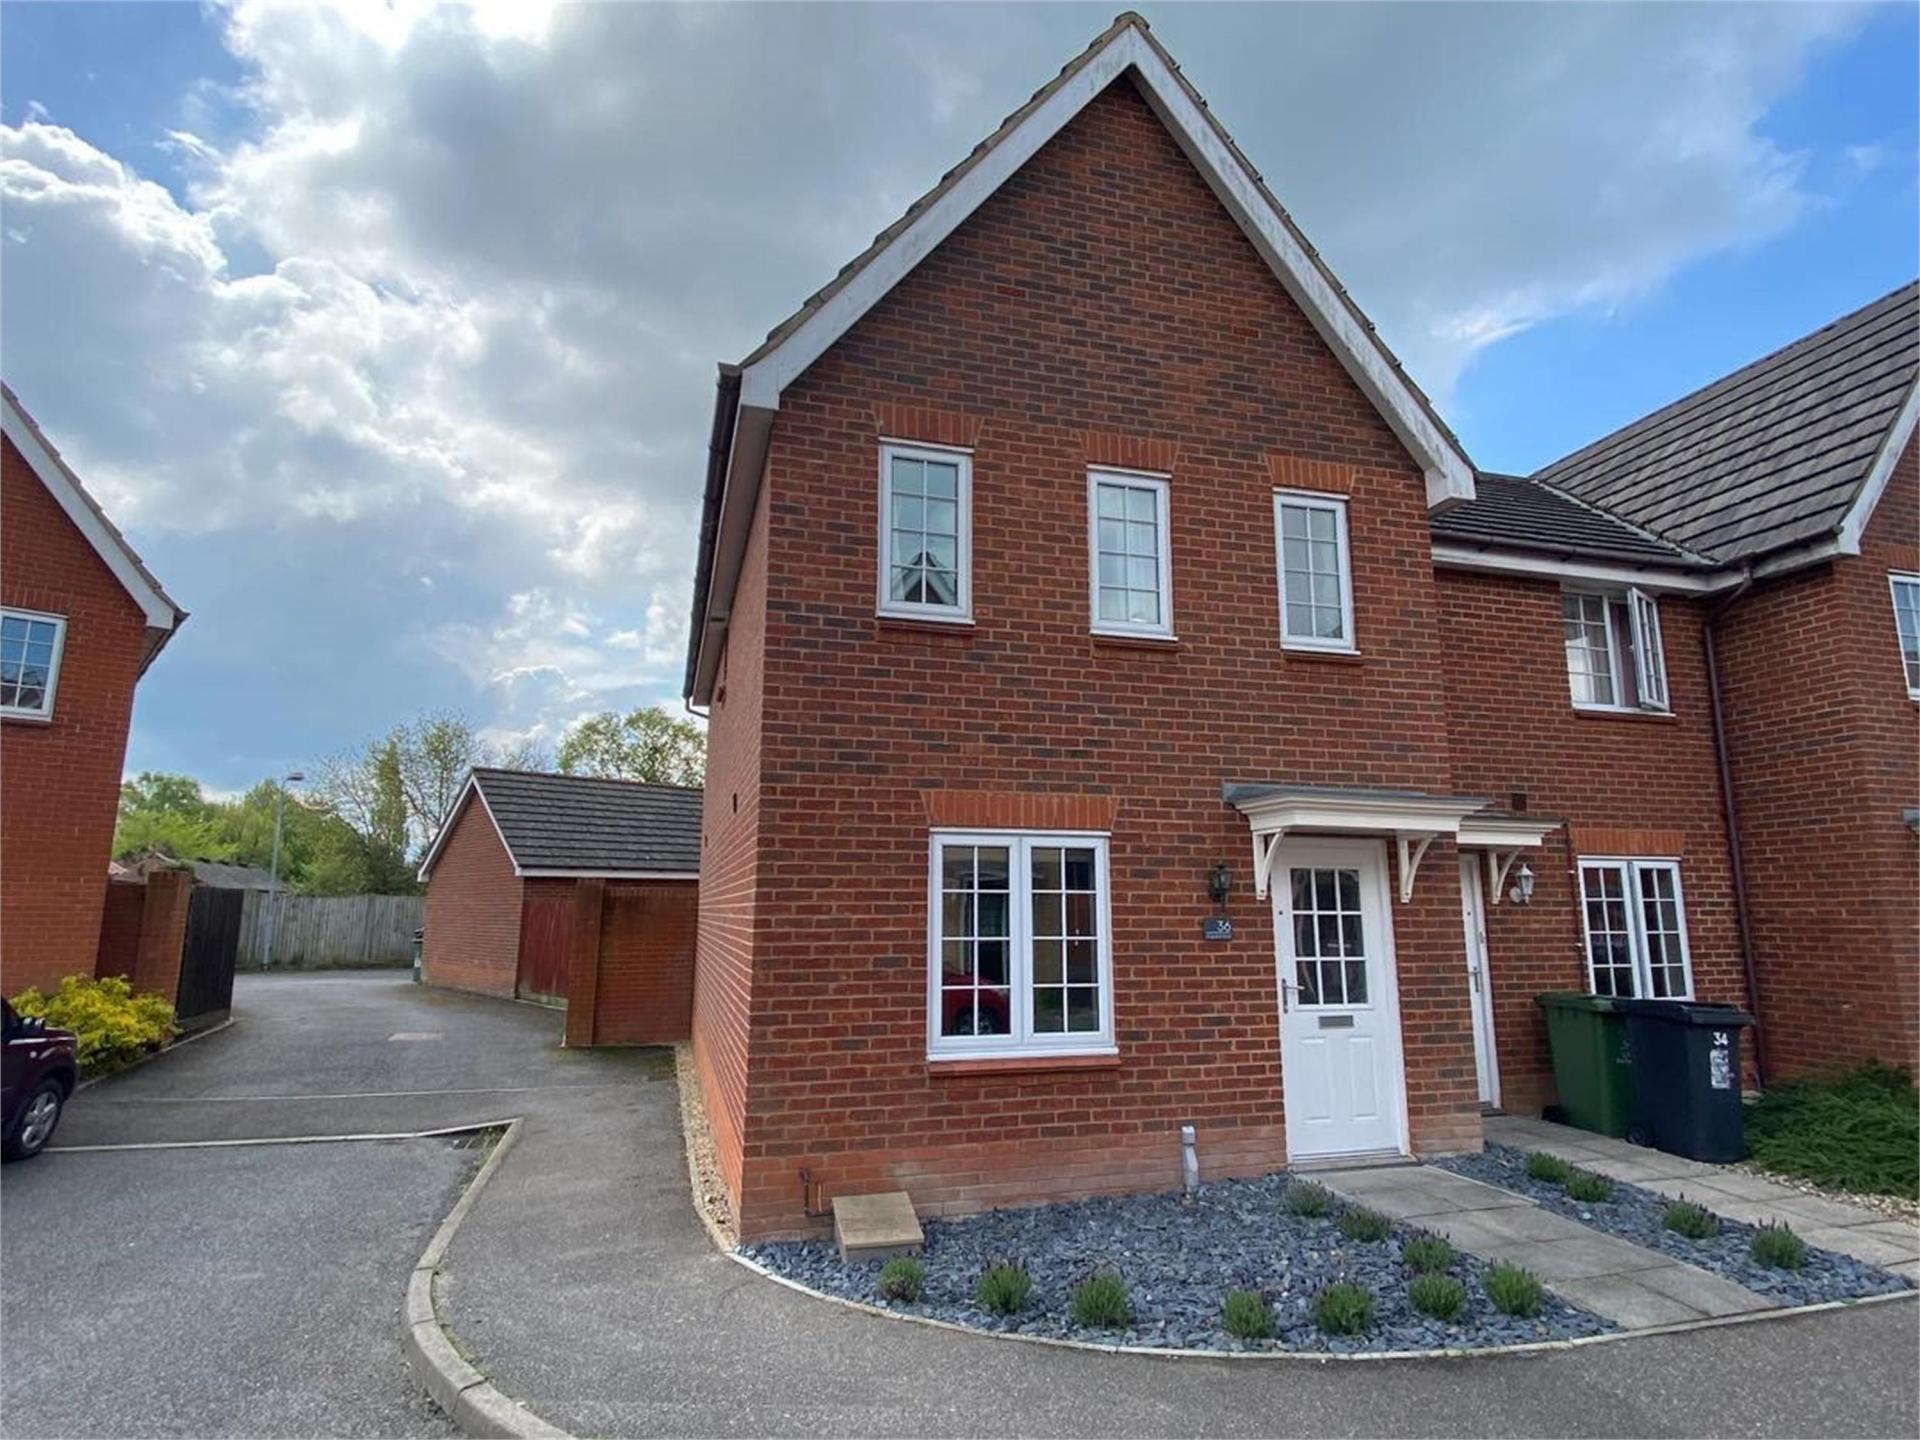 Millbank Estate Agents (Attleborough) new house for sale